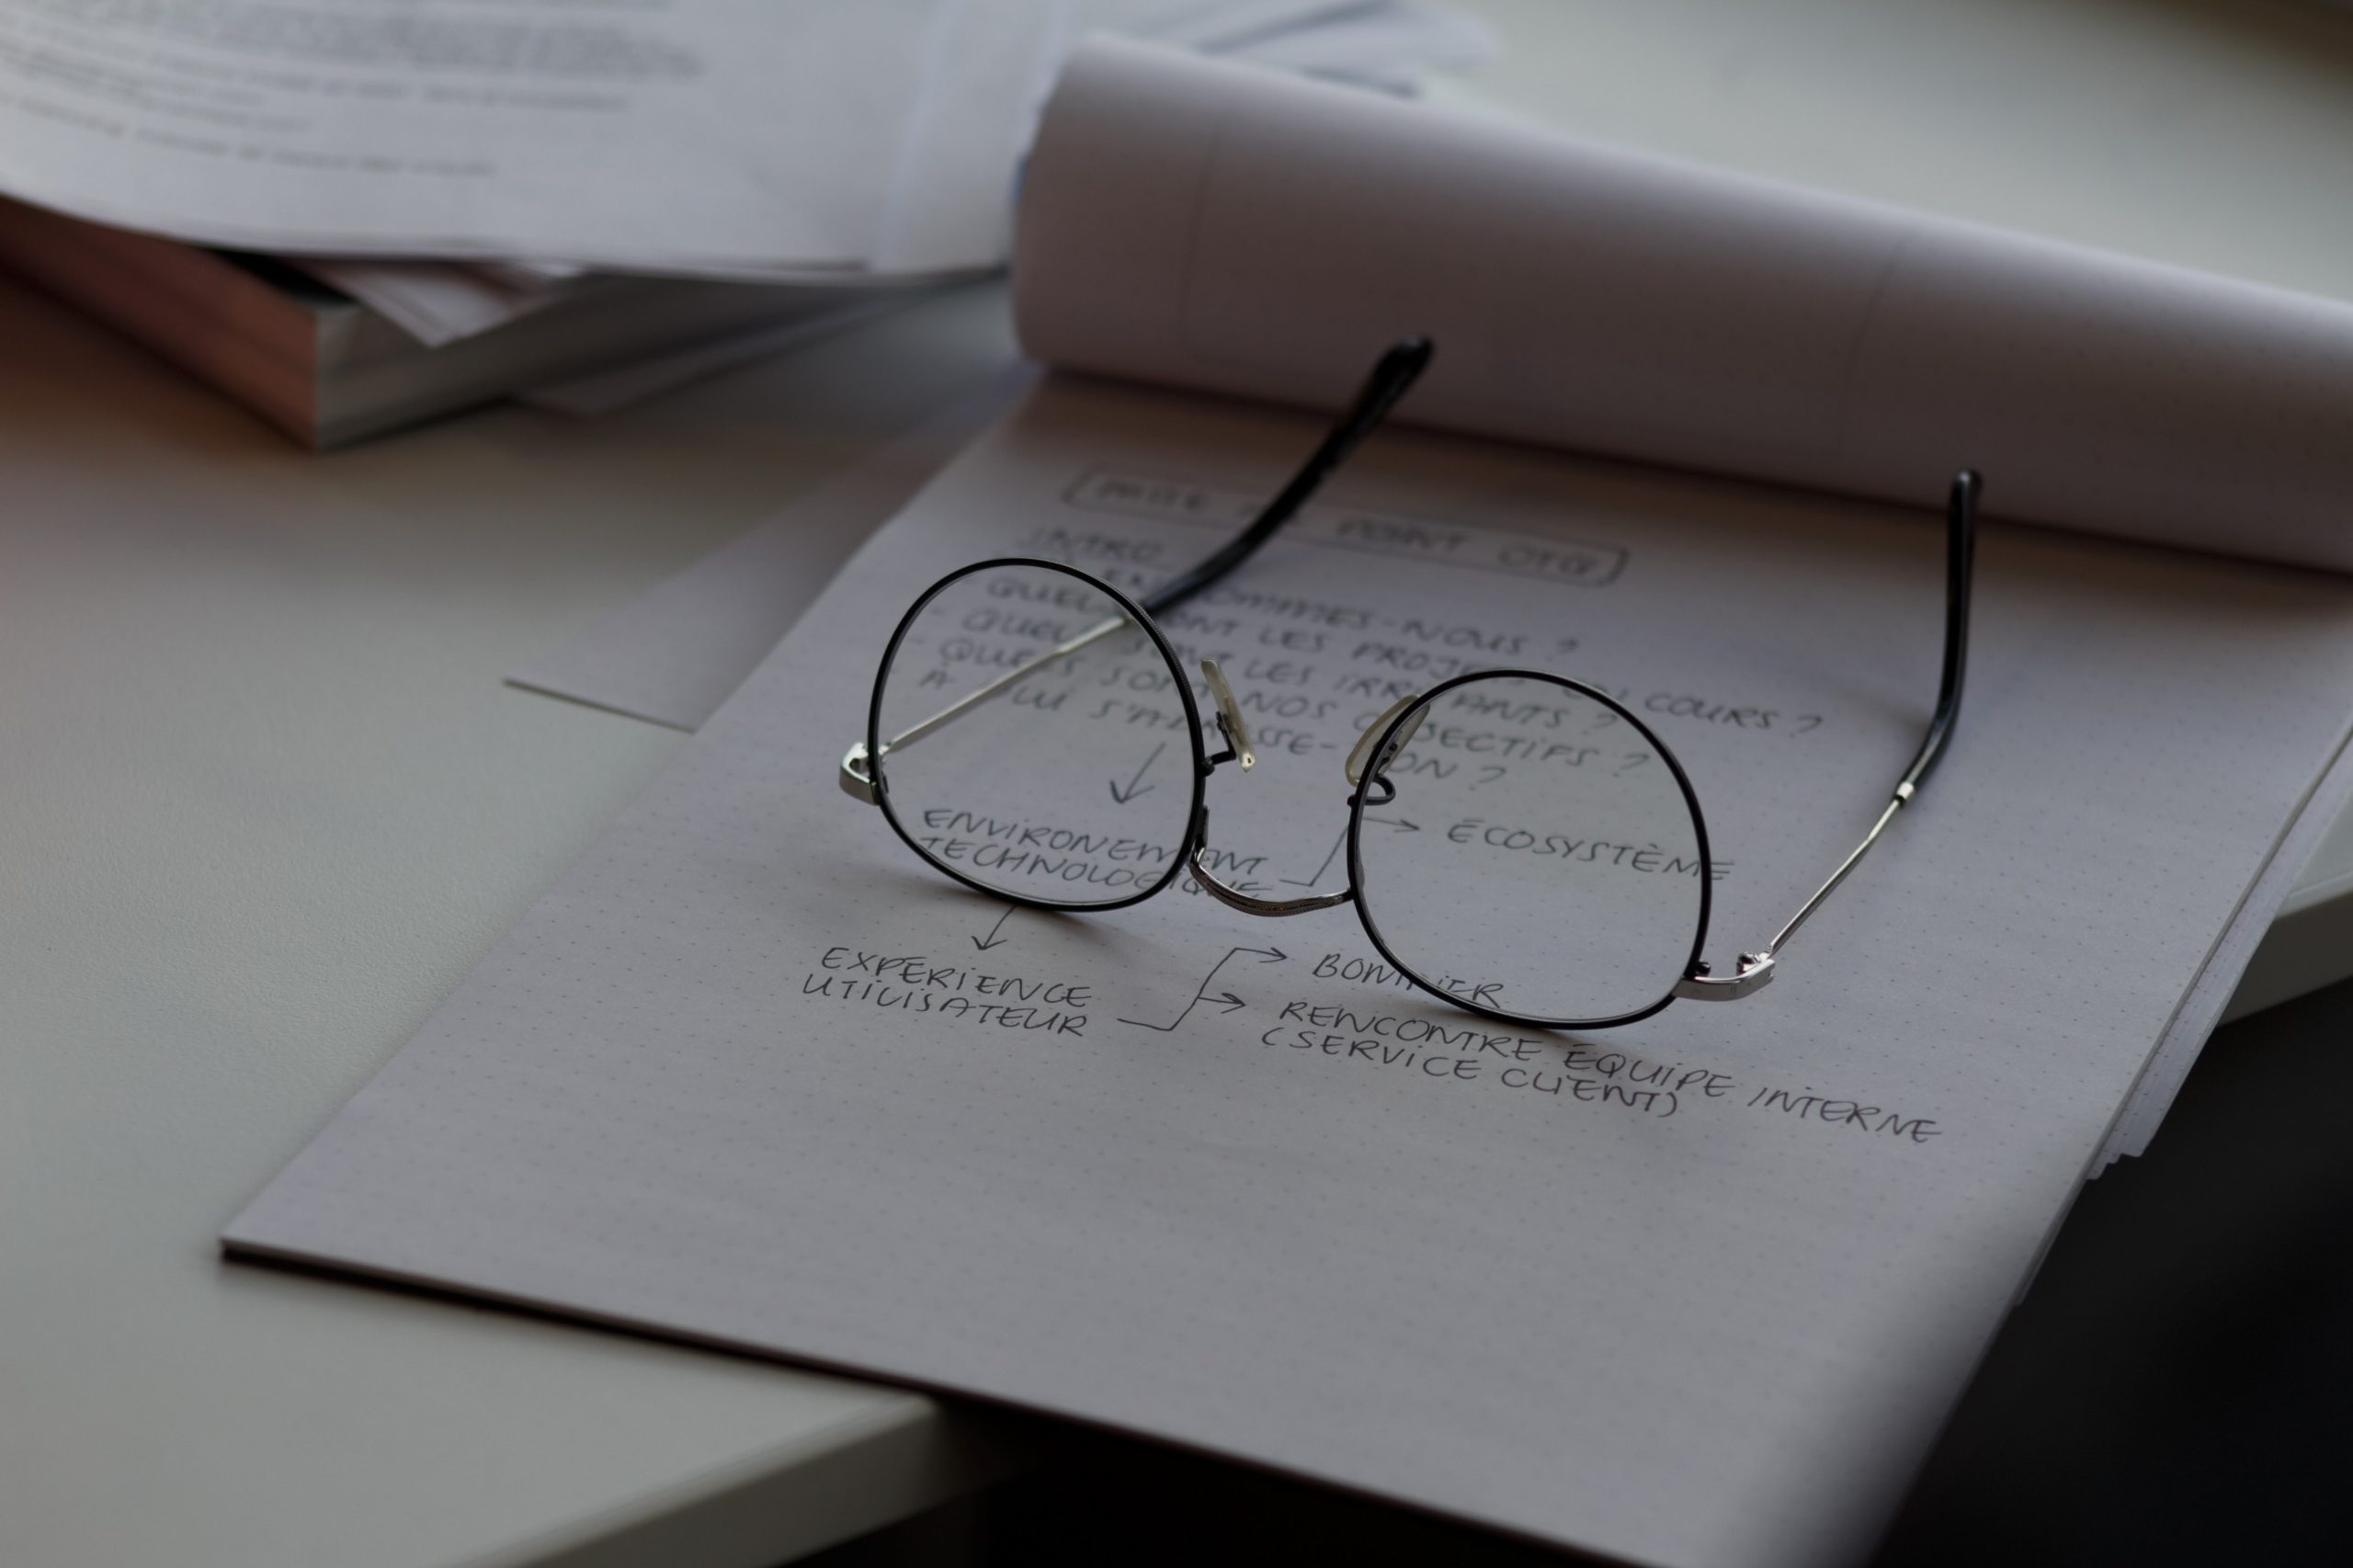 A pair of glasses set atop a sheet of paper containing notes.